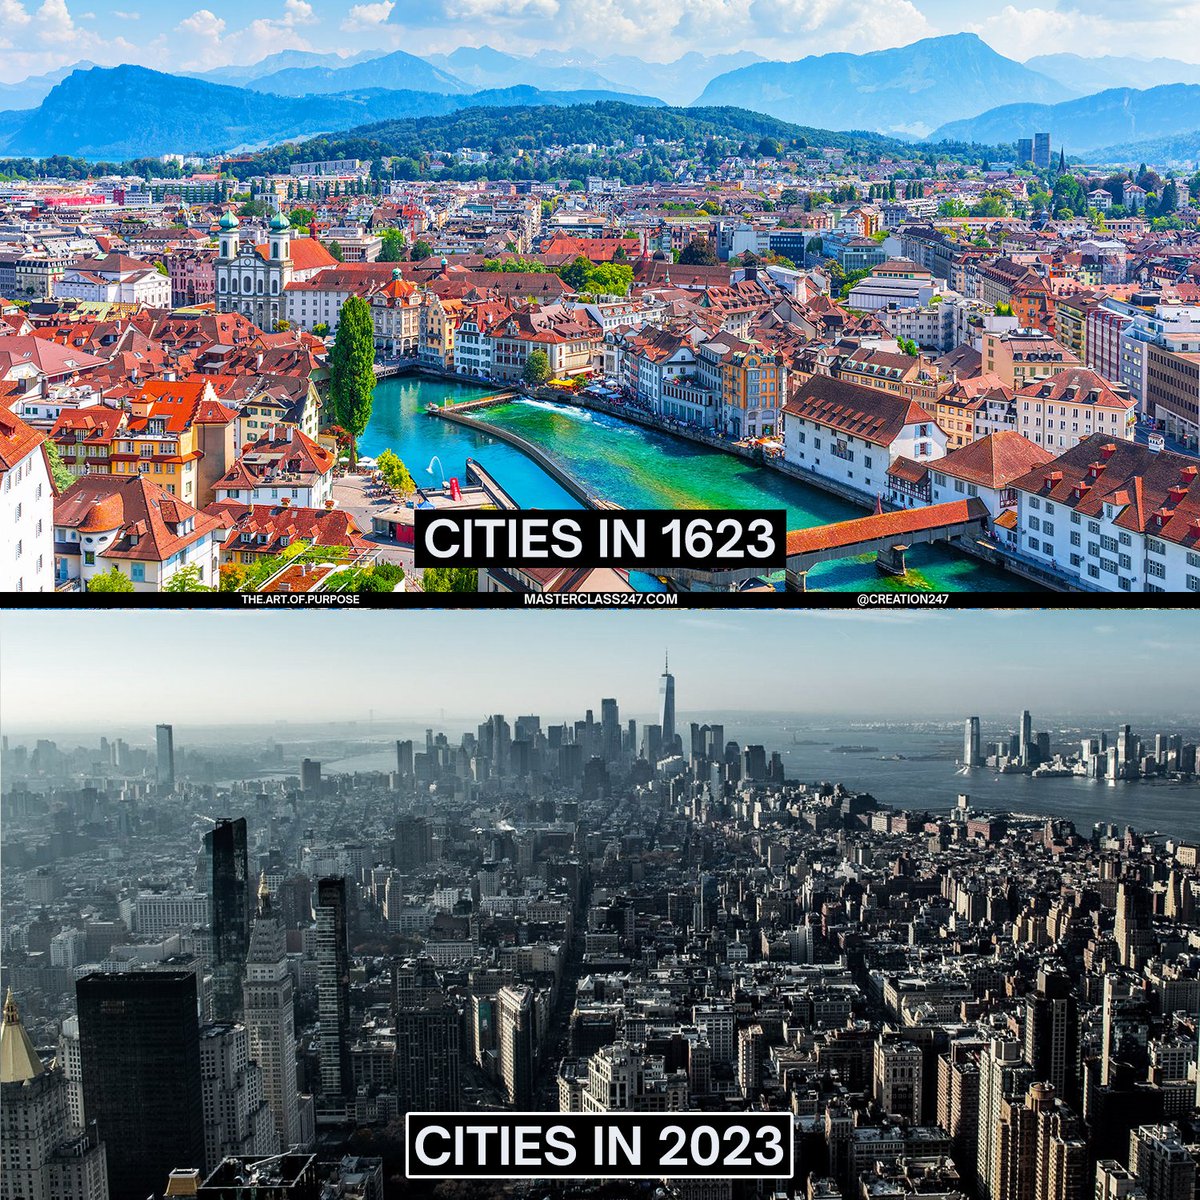 What happened to our cities?